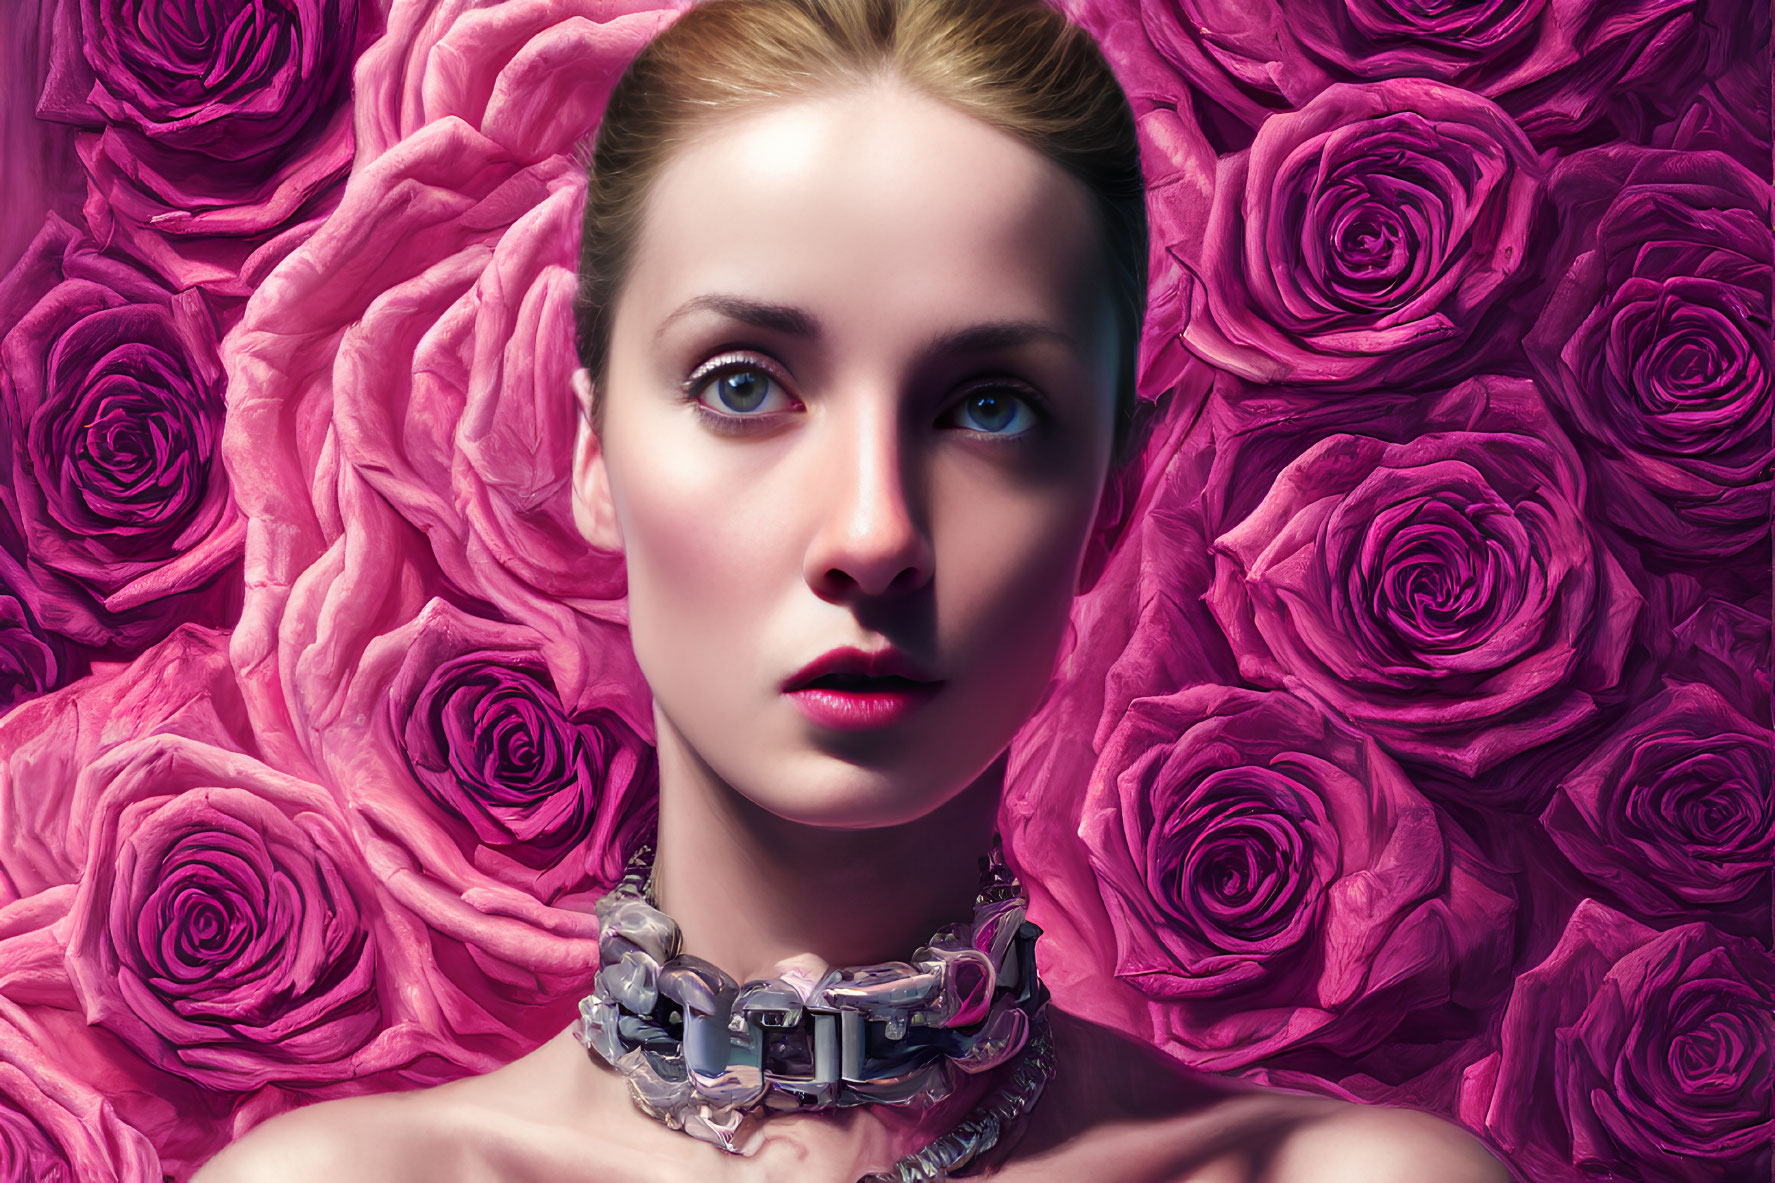 Fair-skinned woman with striking eyes surrounded by vibrant pink roses and wearing a futuristic silver choker